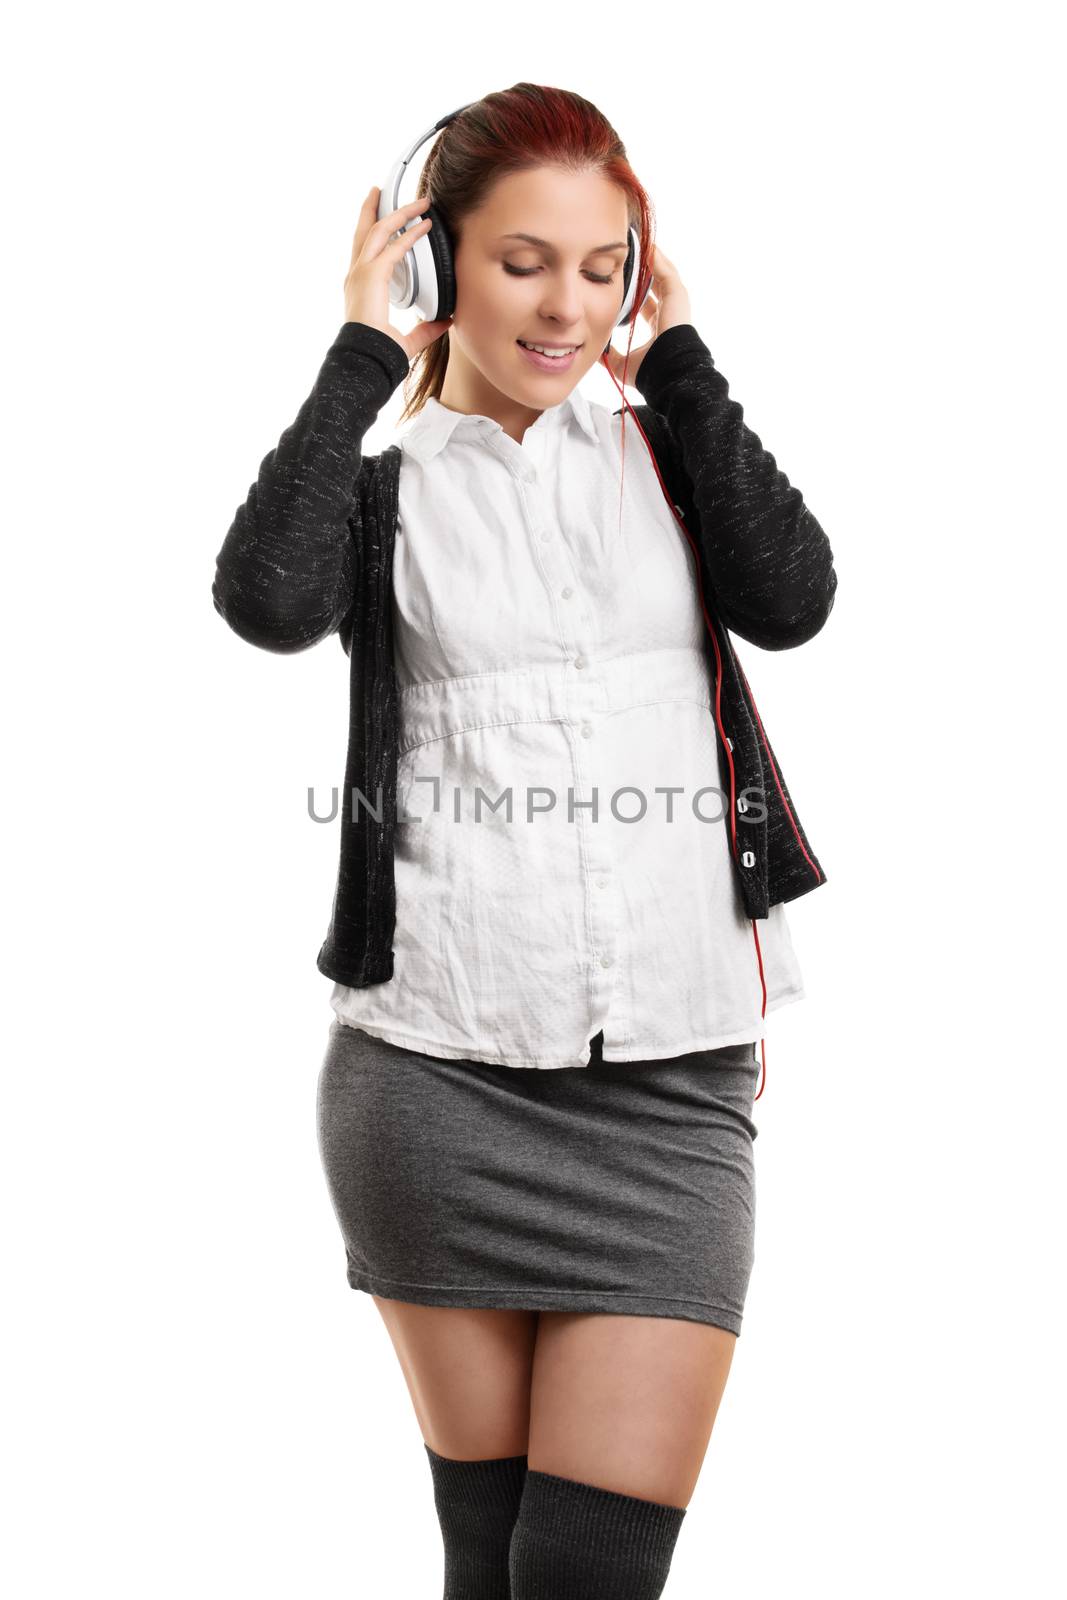 Young woman enjoying music on her headphones by Mendelex